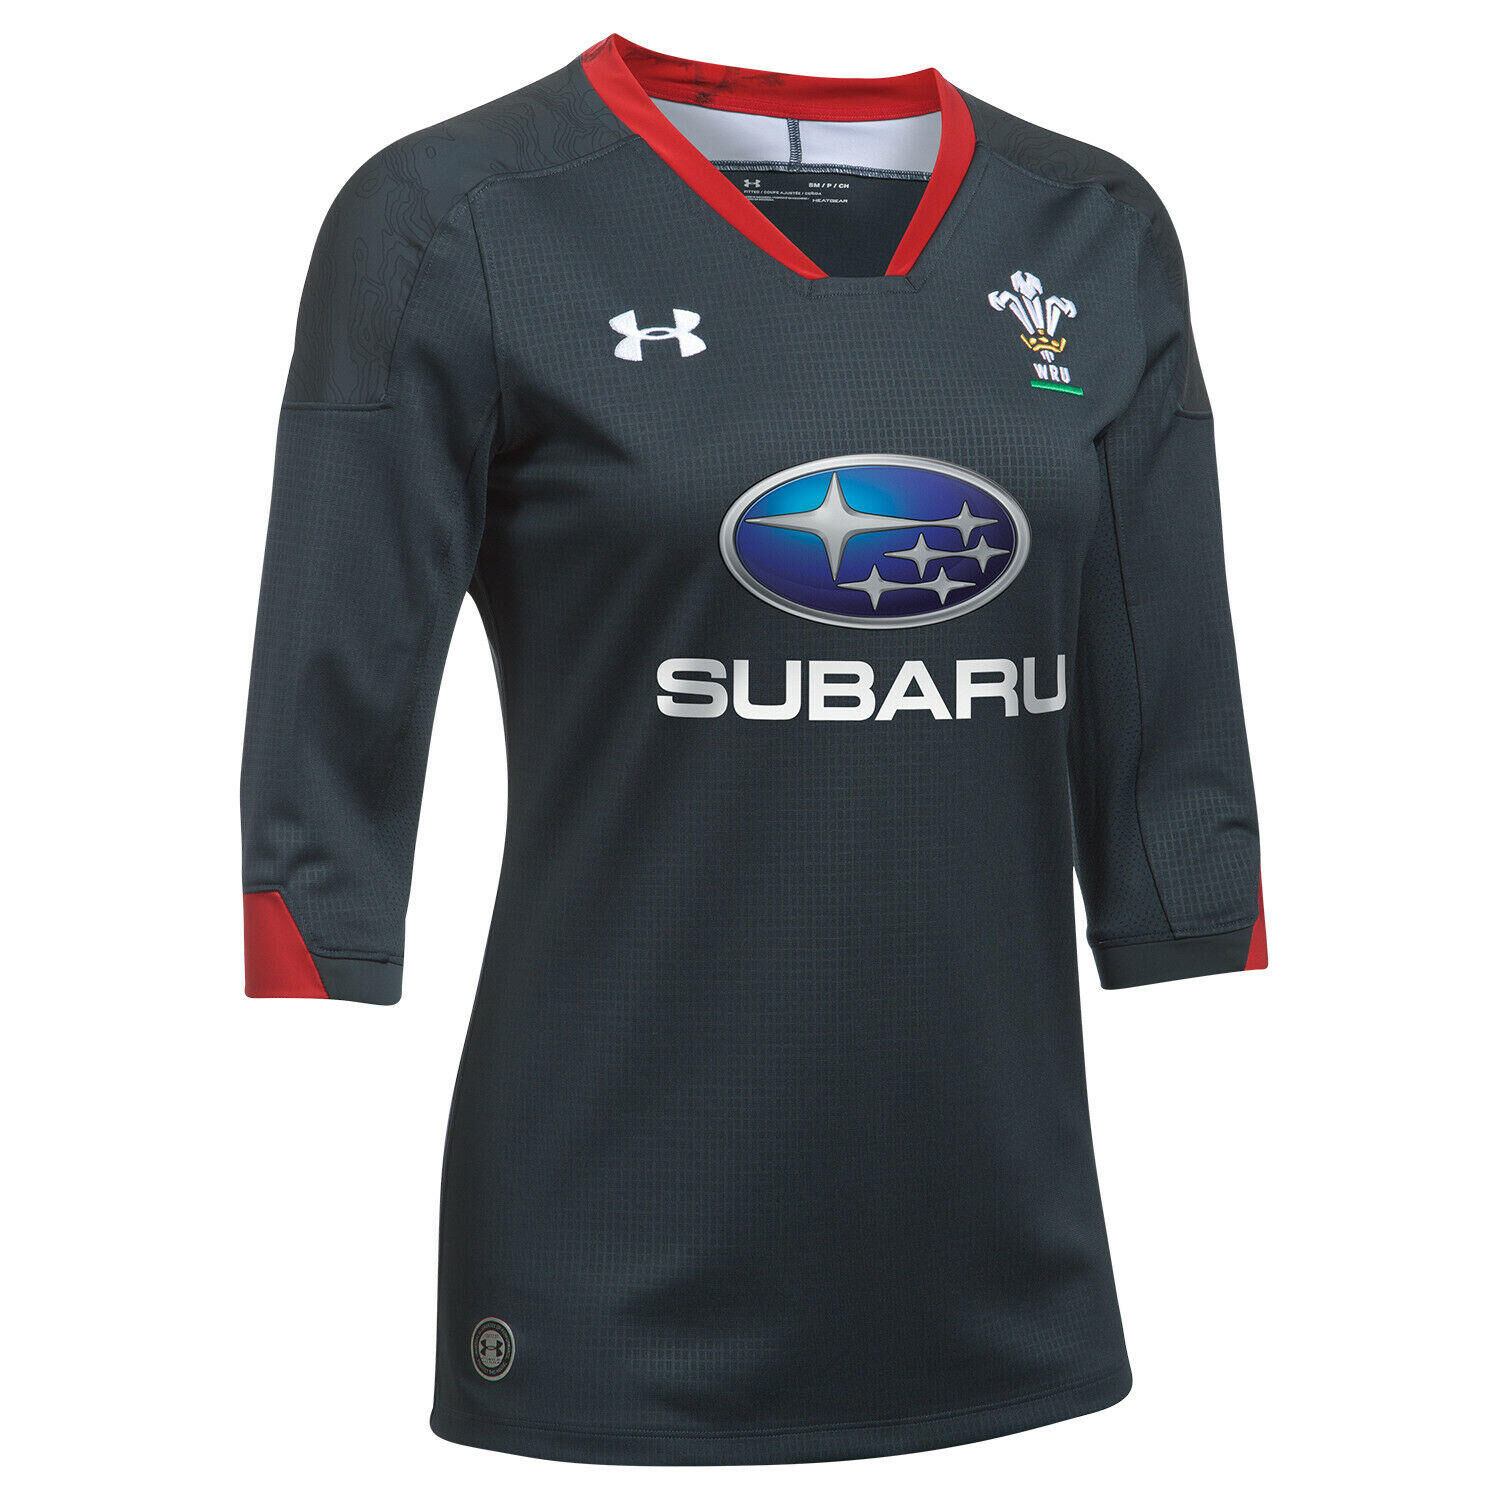 UNDER ARMOUR Under Armour Wales WRU Away 17/18 Womens Supporters Rugby Shirt Grey